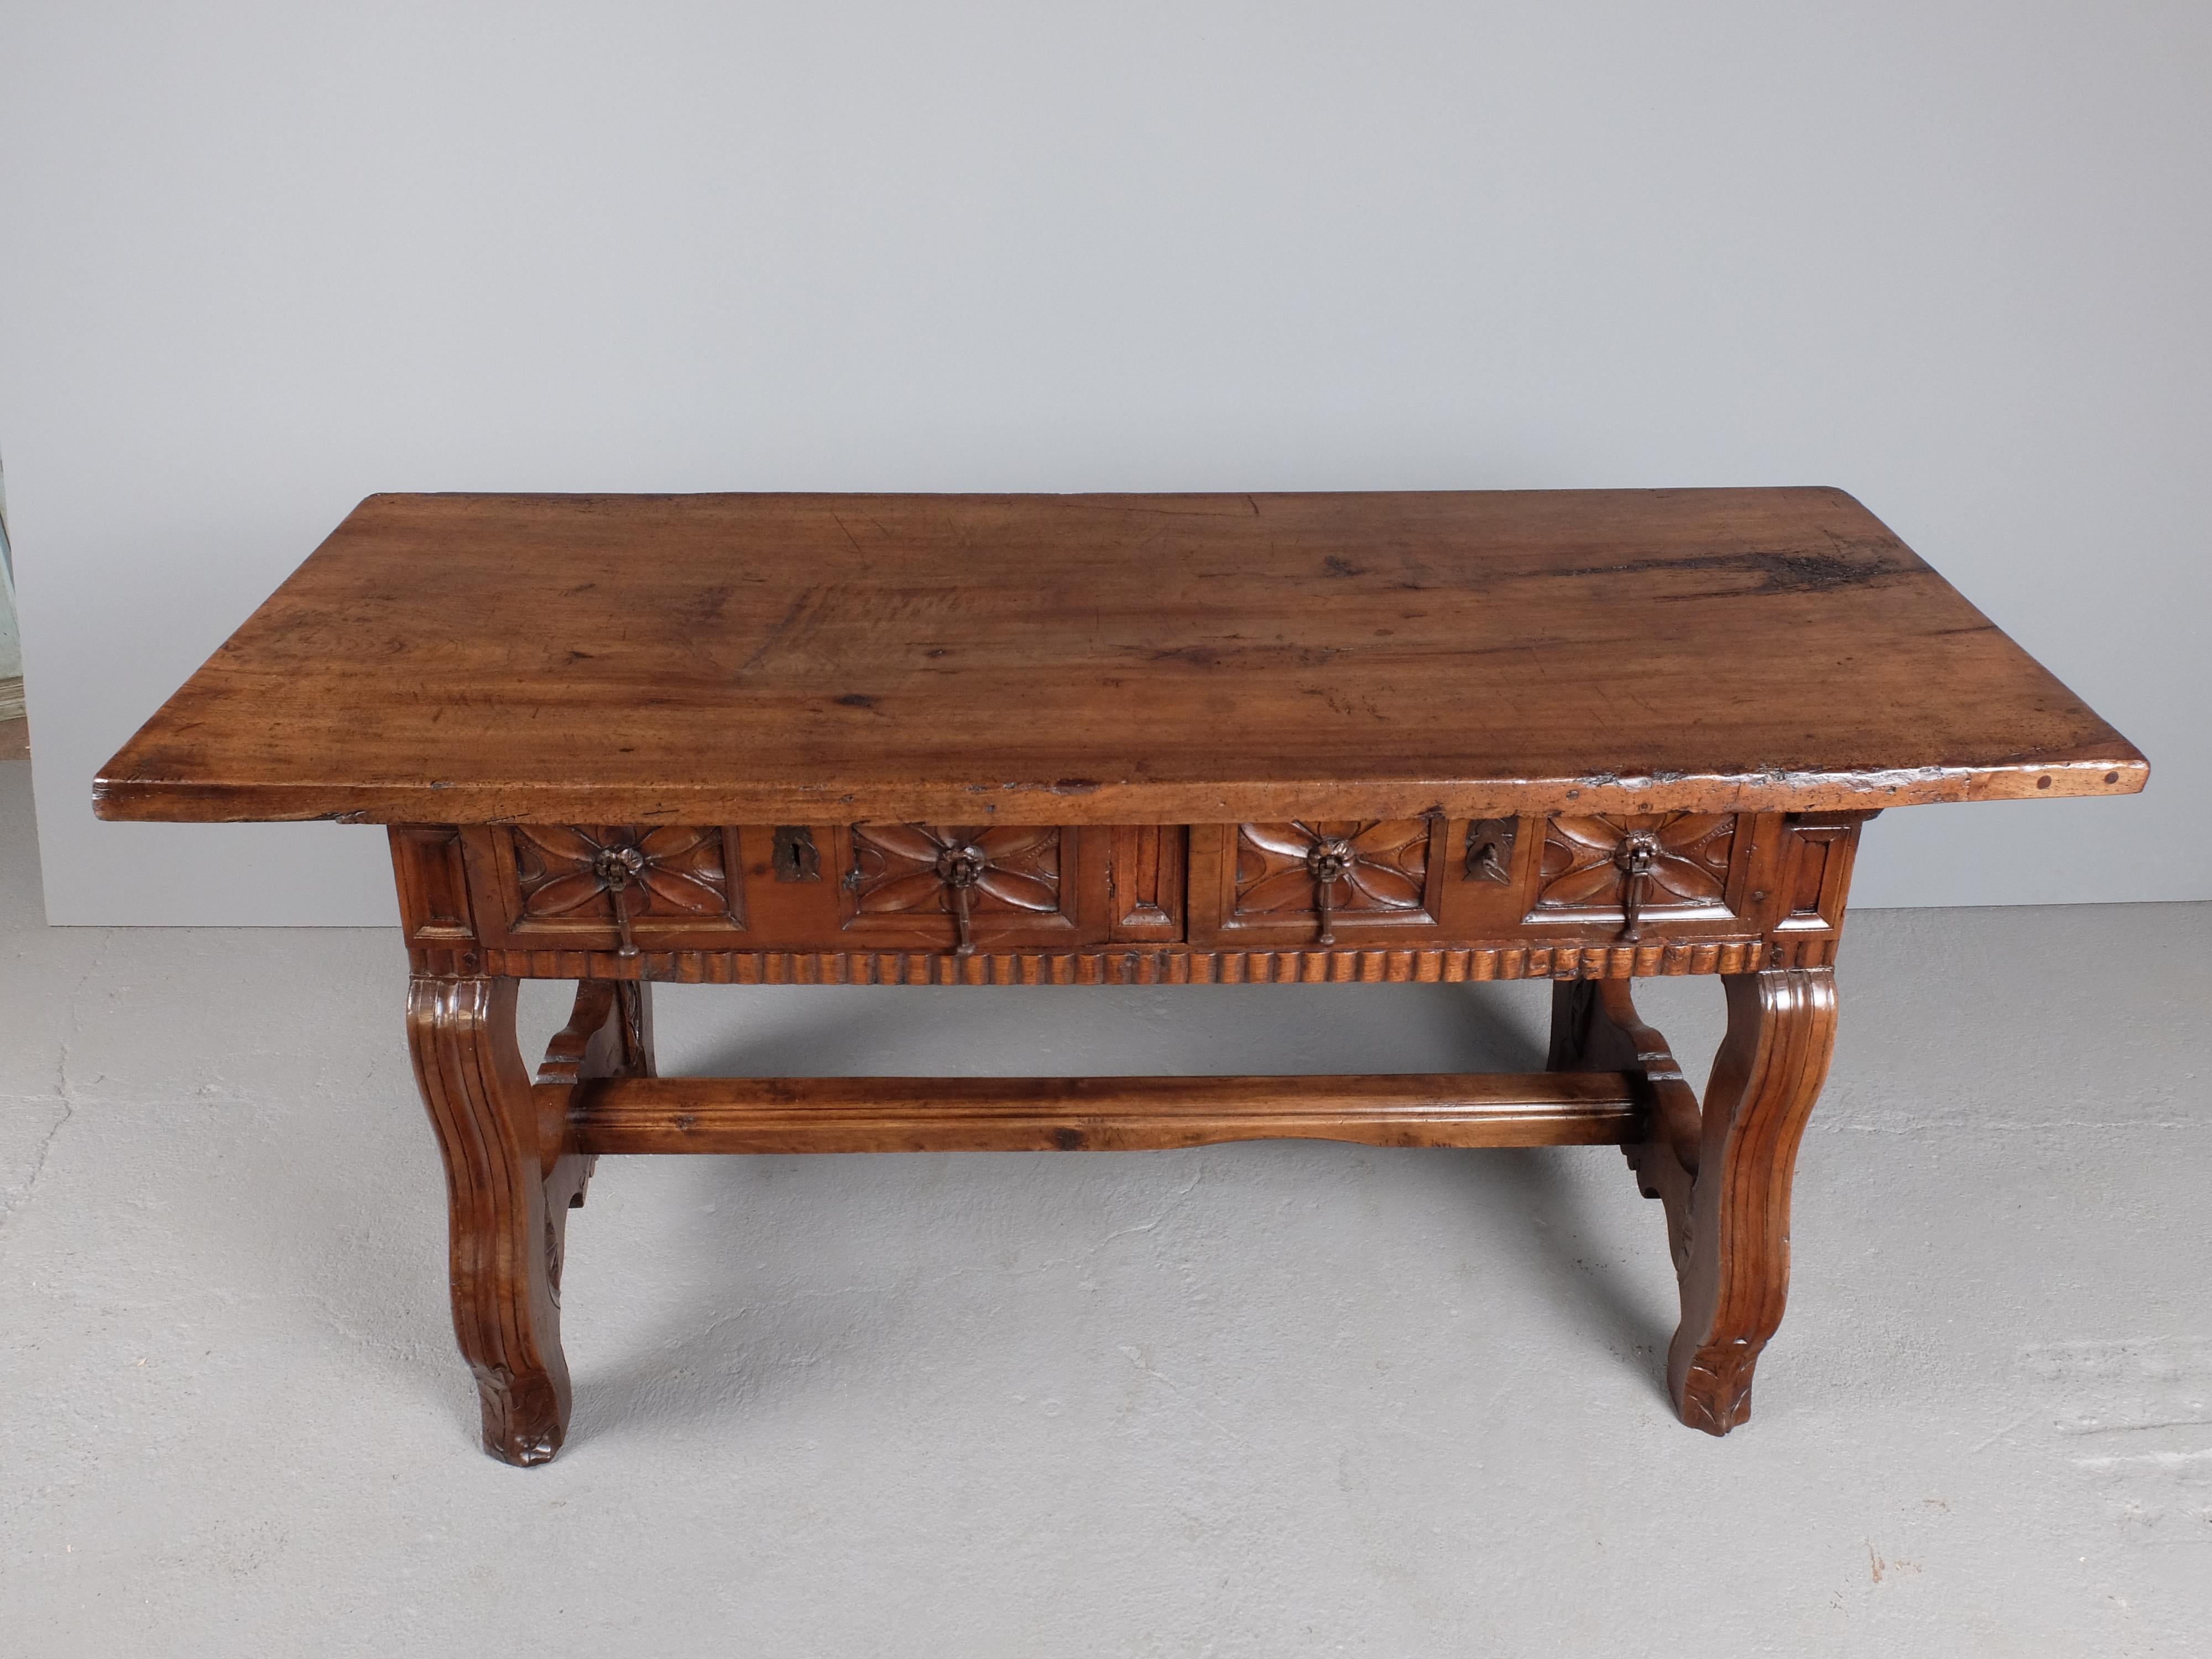 An important two-drawer Baroque library table from the provincial capital of Valladolid in Old Castile, Spain.

Constructed of solid light Spanish walnut with oak as the secondary wood on the insides of drawers, this mid to late 17th century table